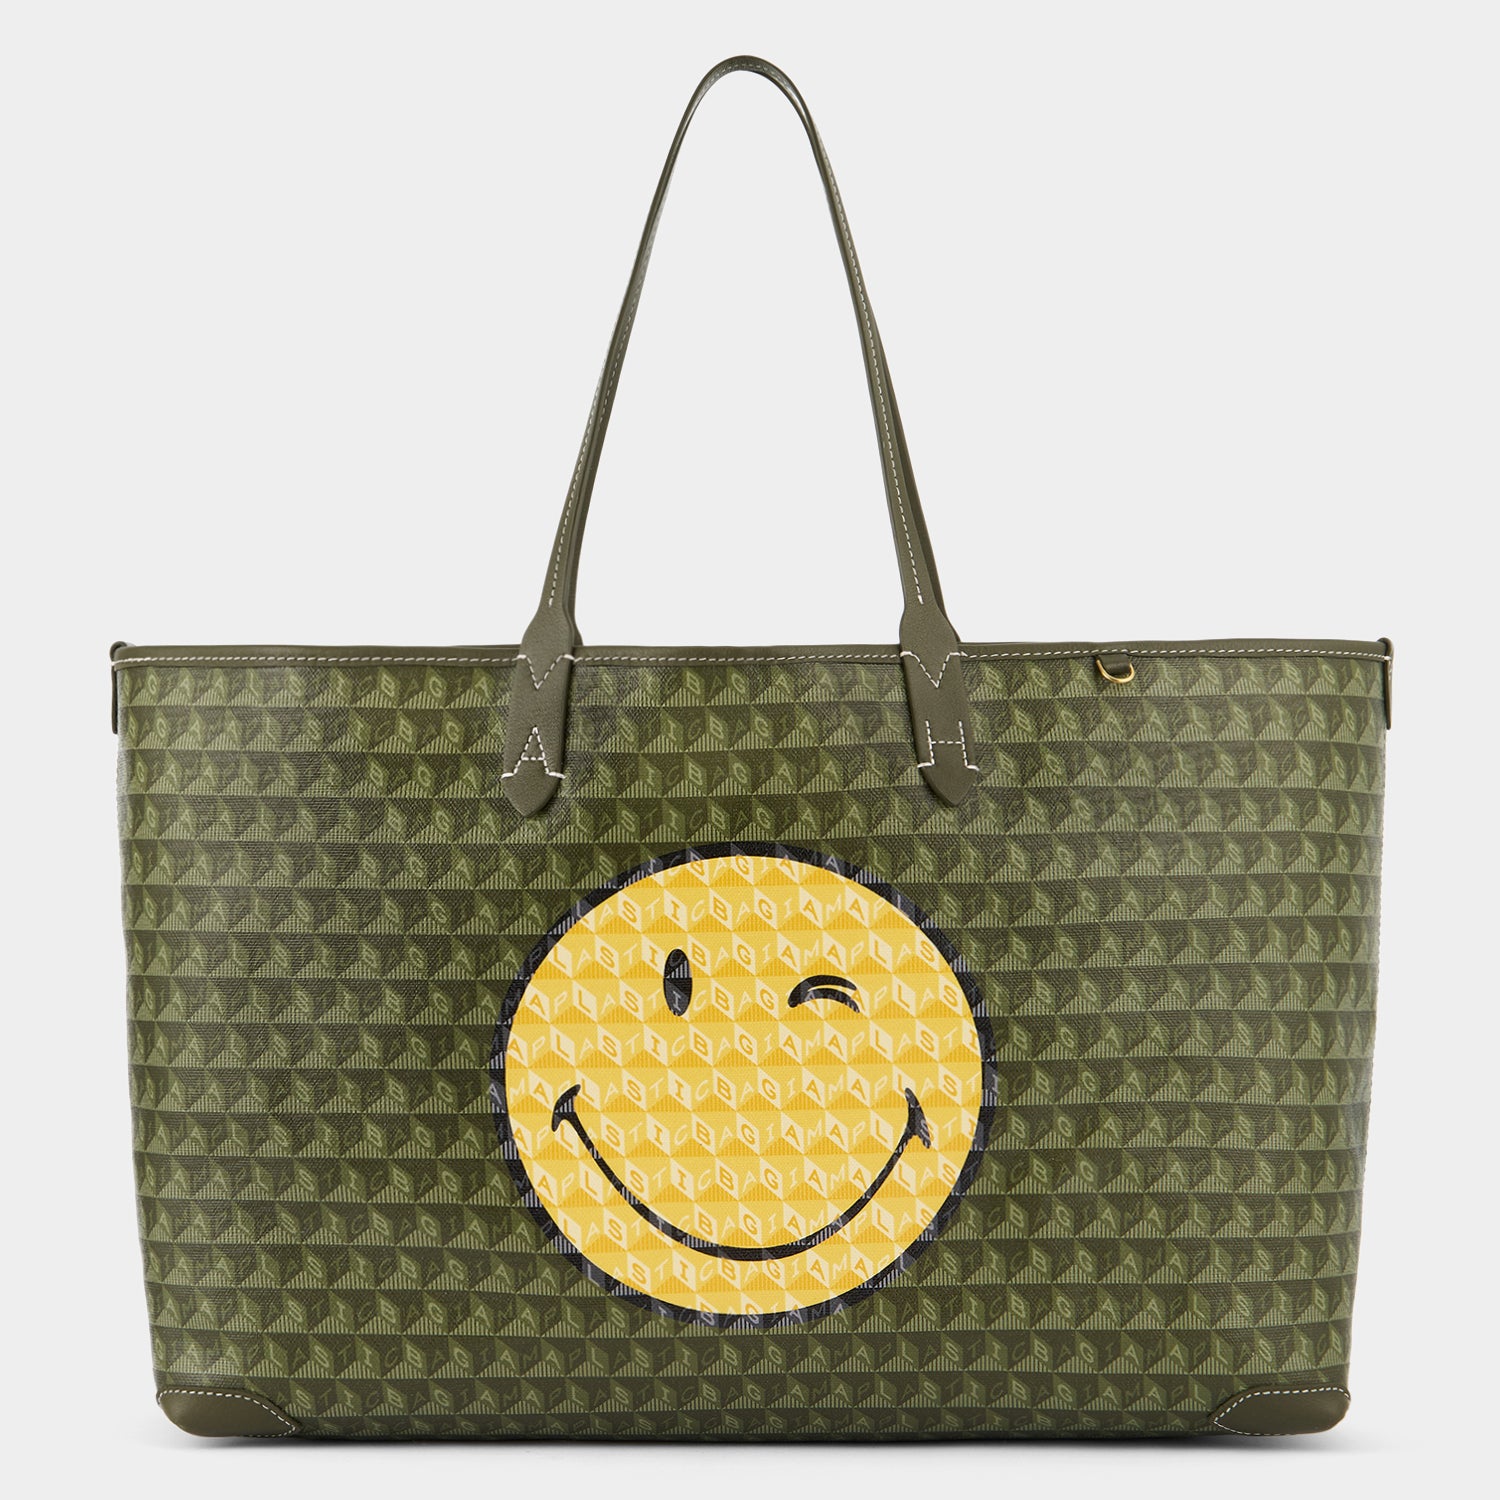 「I AM A Plastic Bag」 ウィンク トート -

                  
                    Recycled Coated Canvas in Fern -
                  

                  Anya Hindmarch JP
